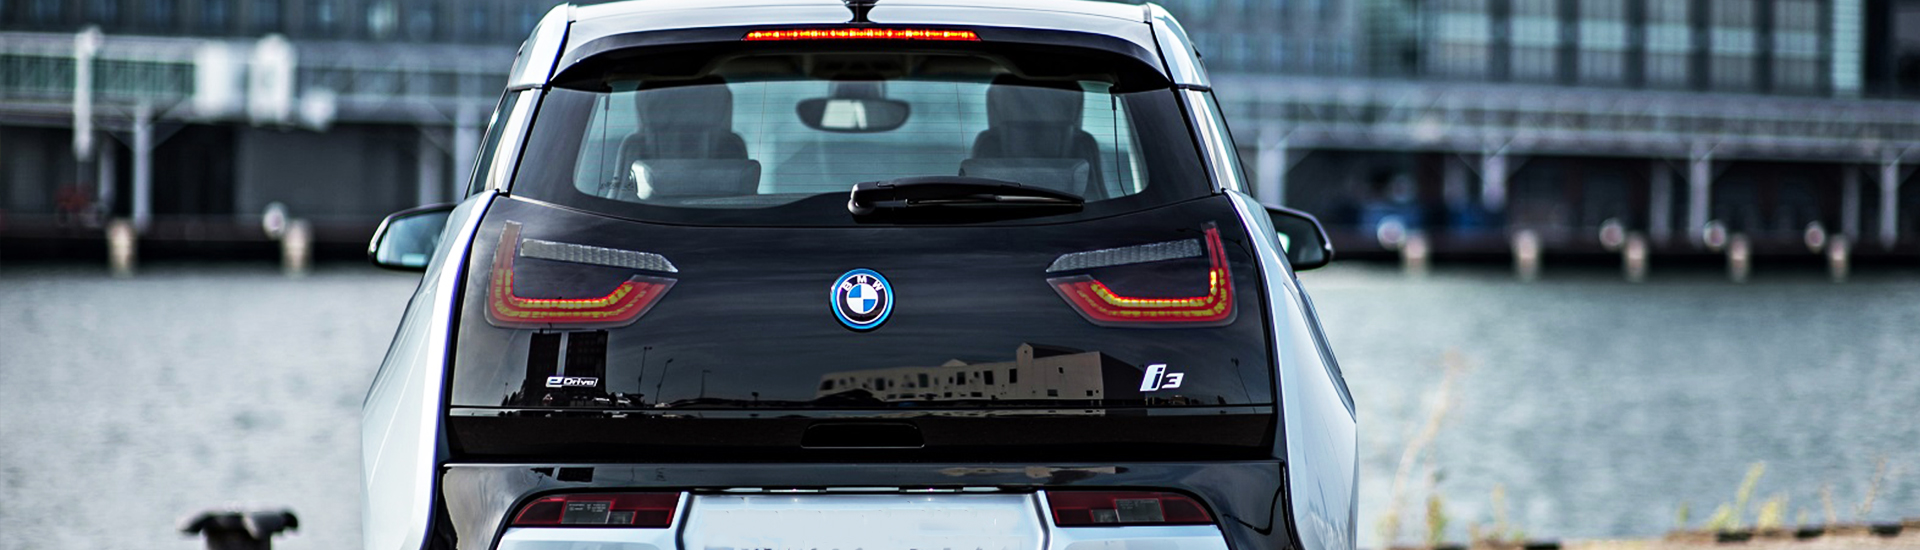 BMW i3 Tail Light Tint Covers